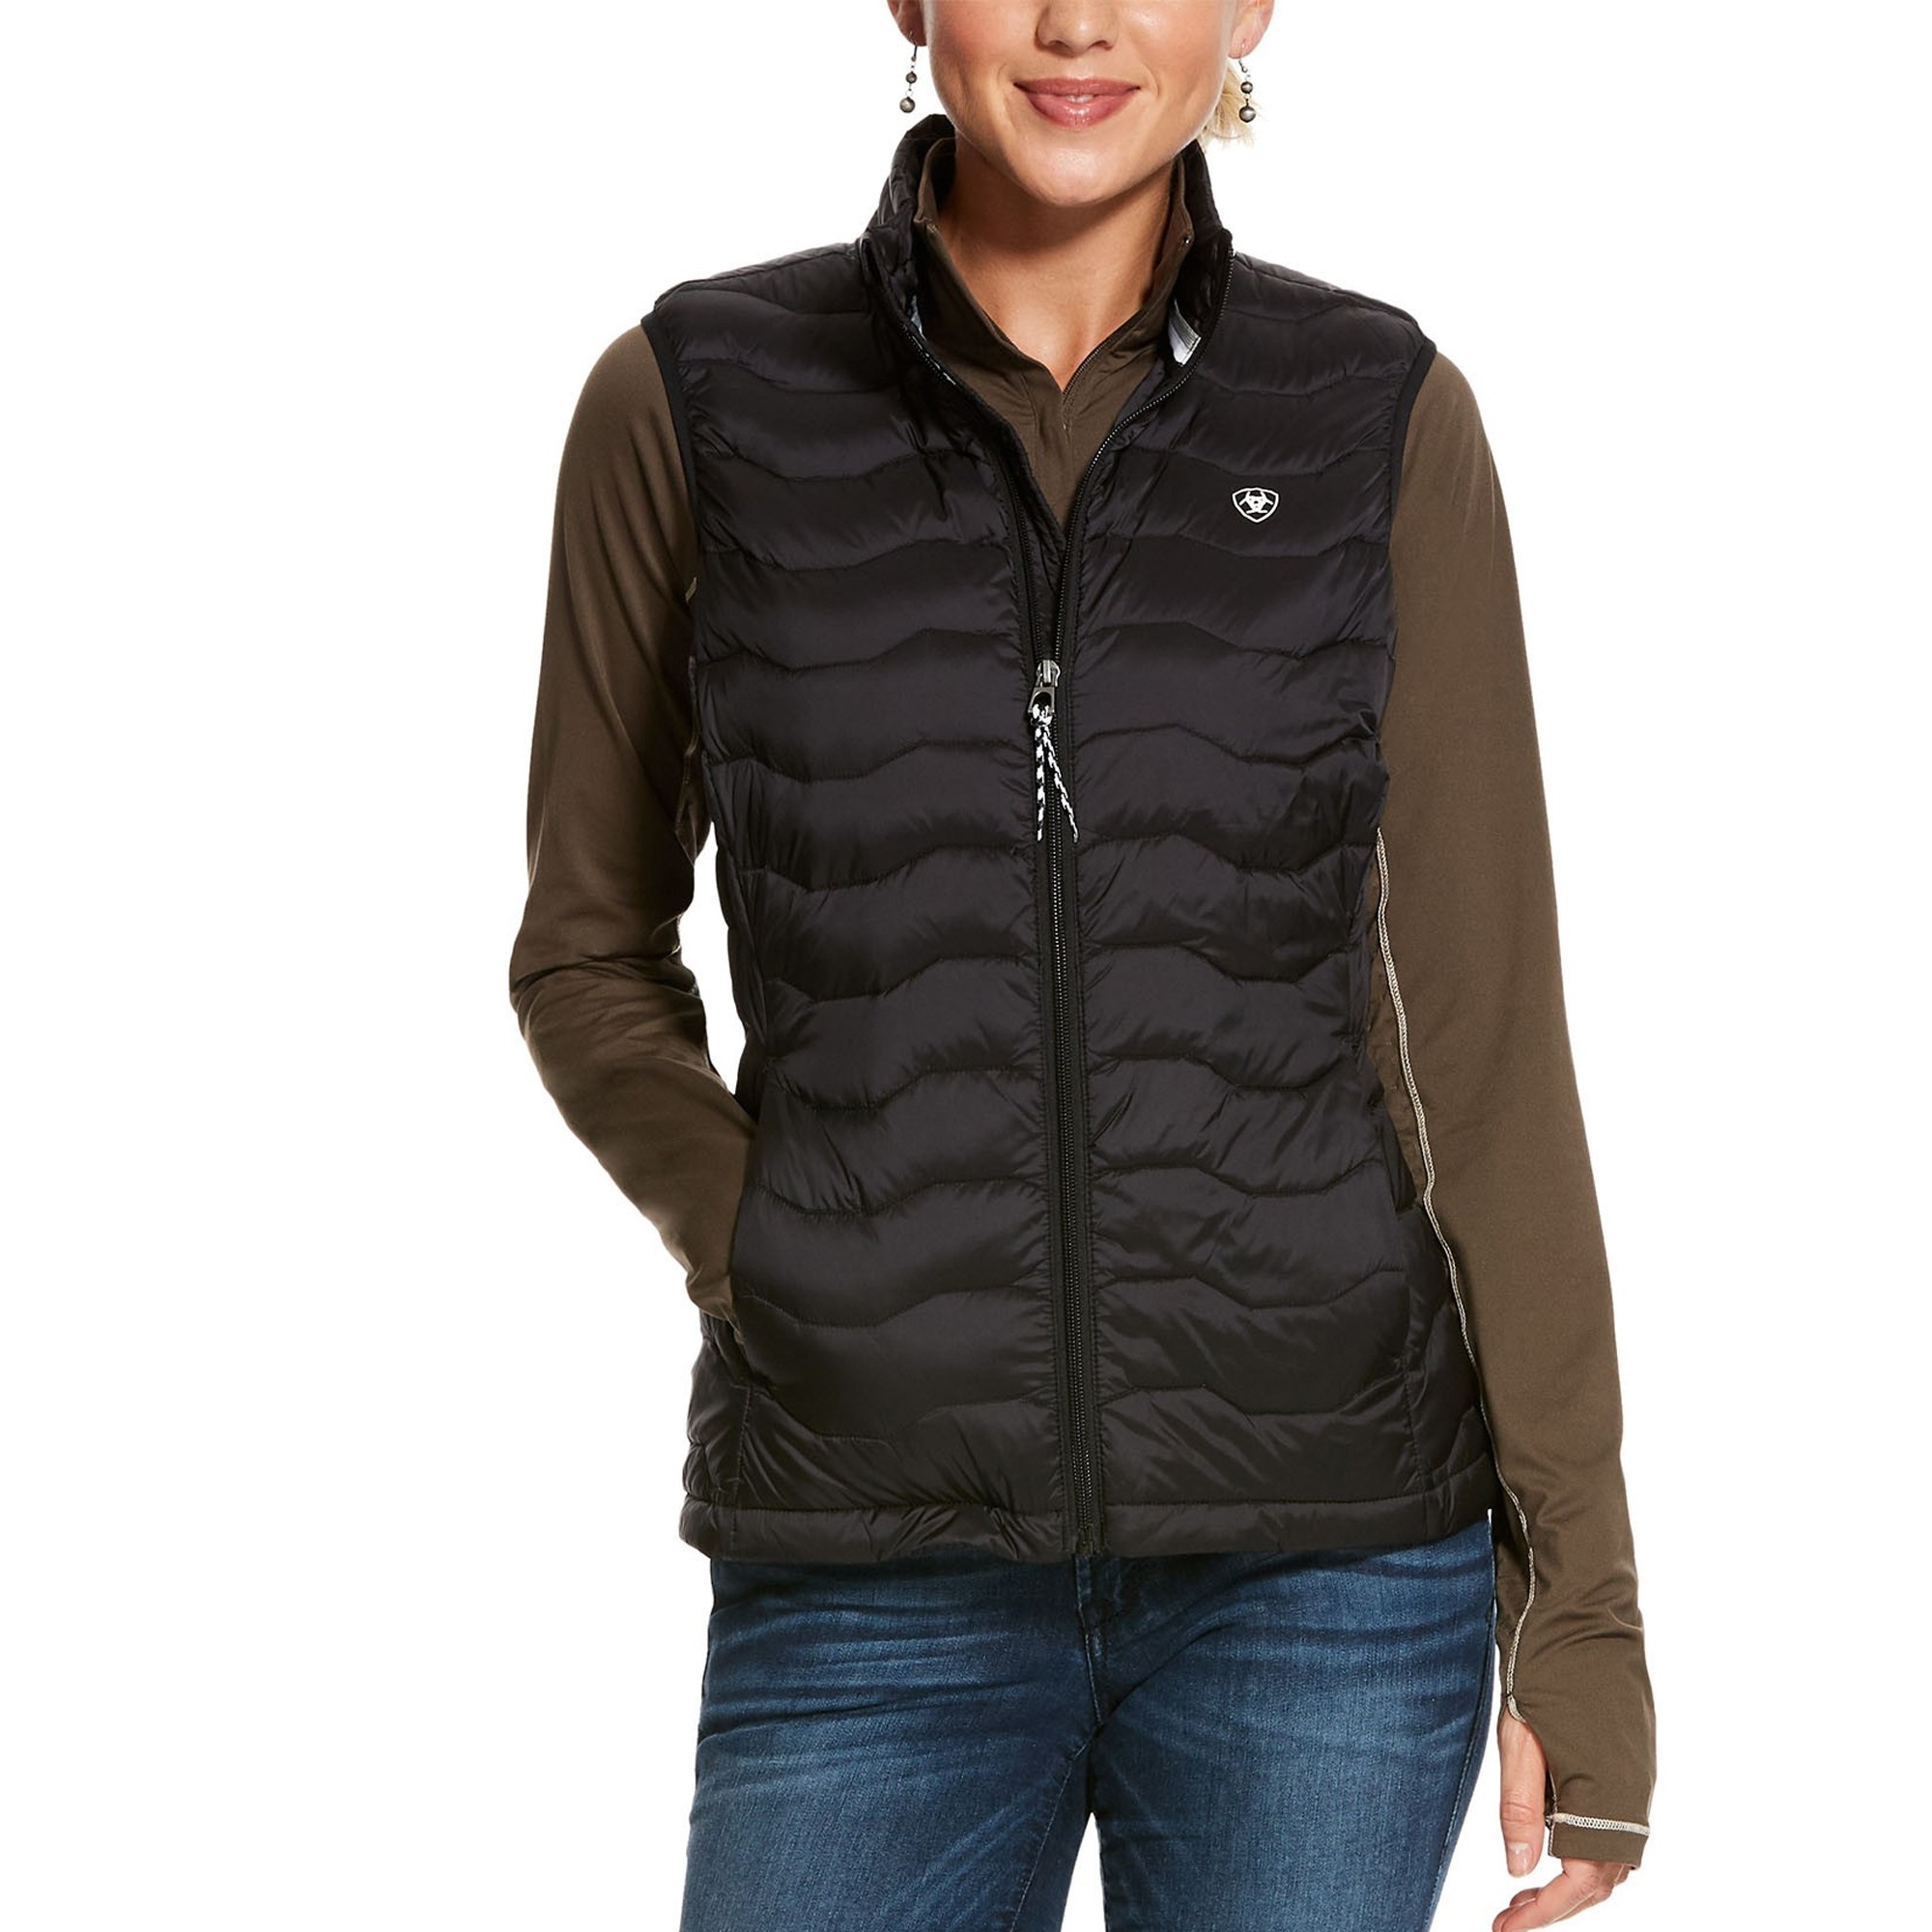 Ariat Women's Ideal 3.0 Down Vest - Old Dairy Saddlery